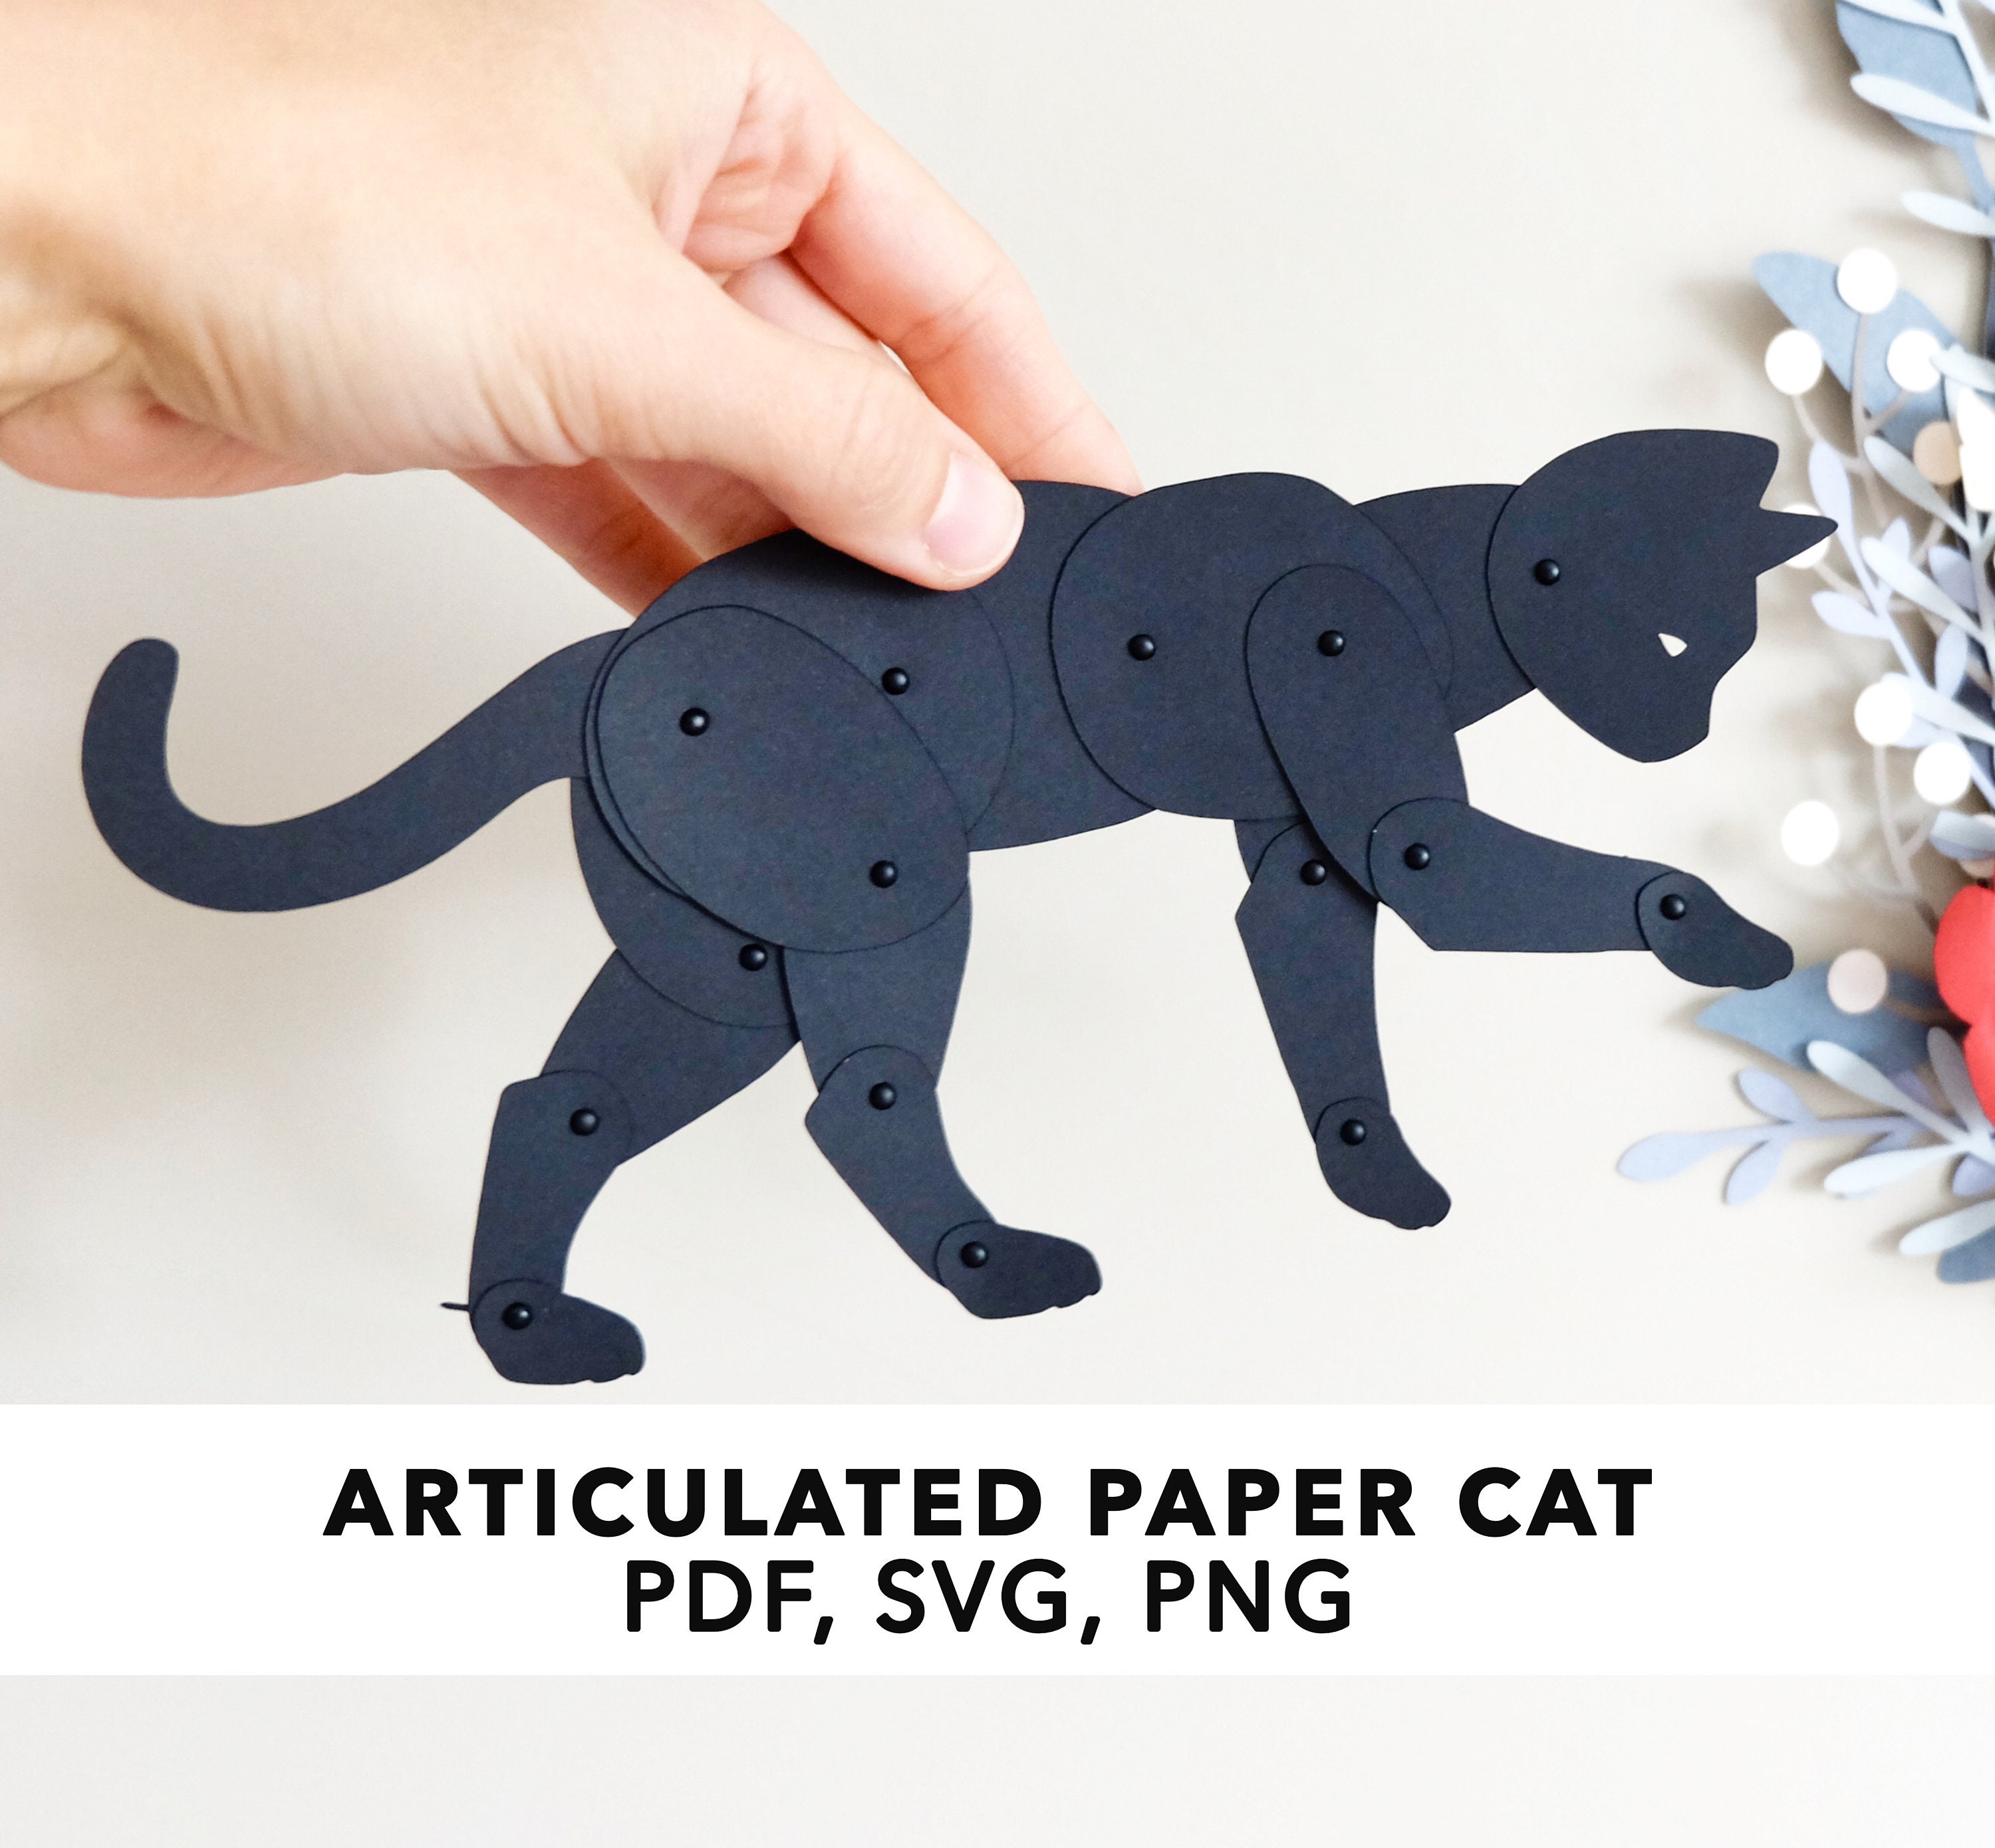 Little Black Cat  Paper toys template, Paper doll template, Paper